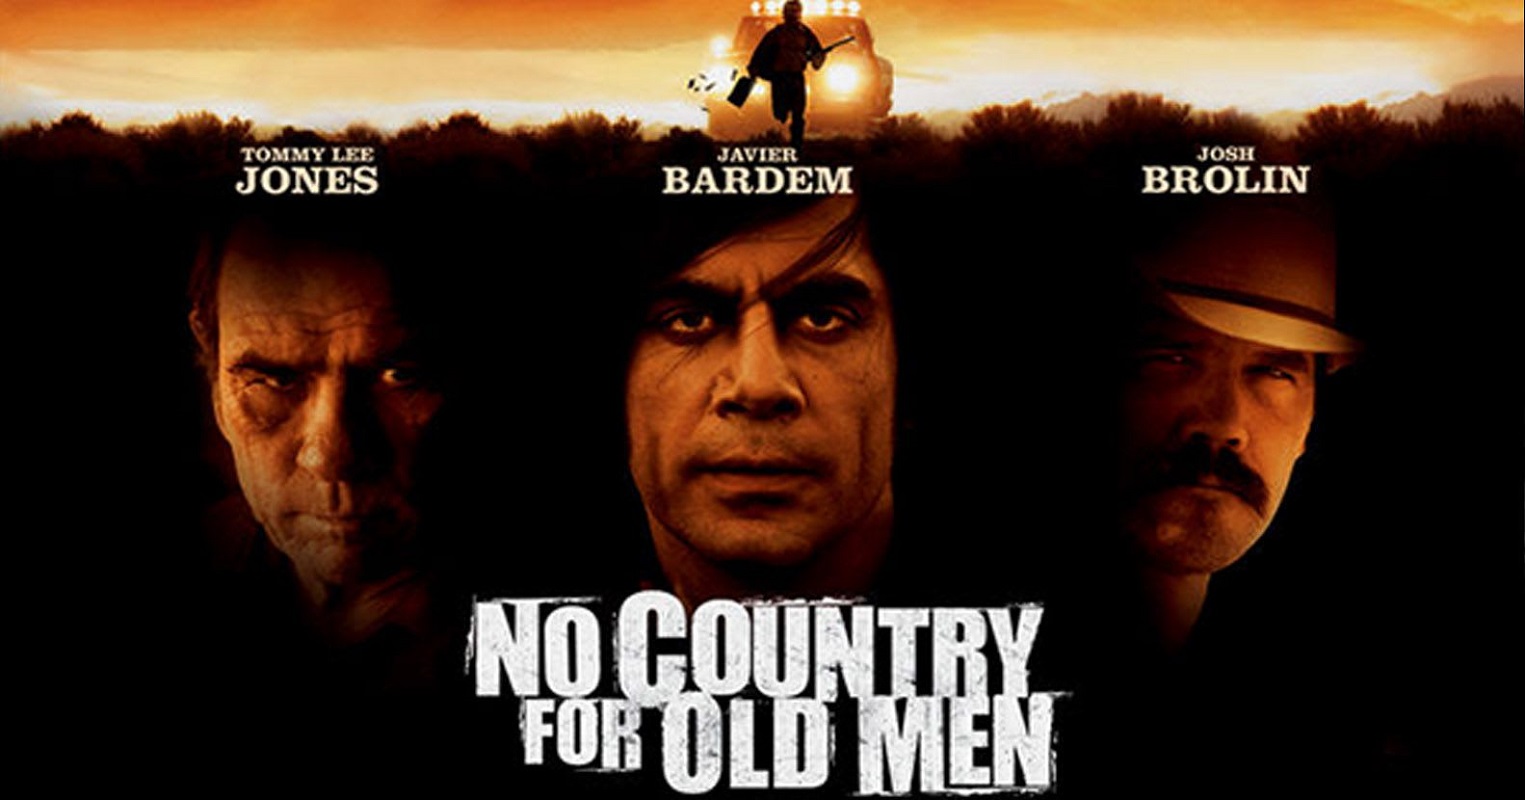 Име:  no country for old men.jpg
Разглеждания: 102
Размер:  169,6 КБ